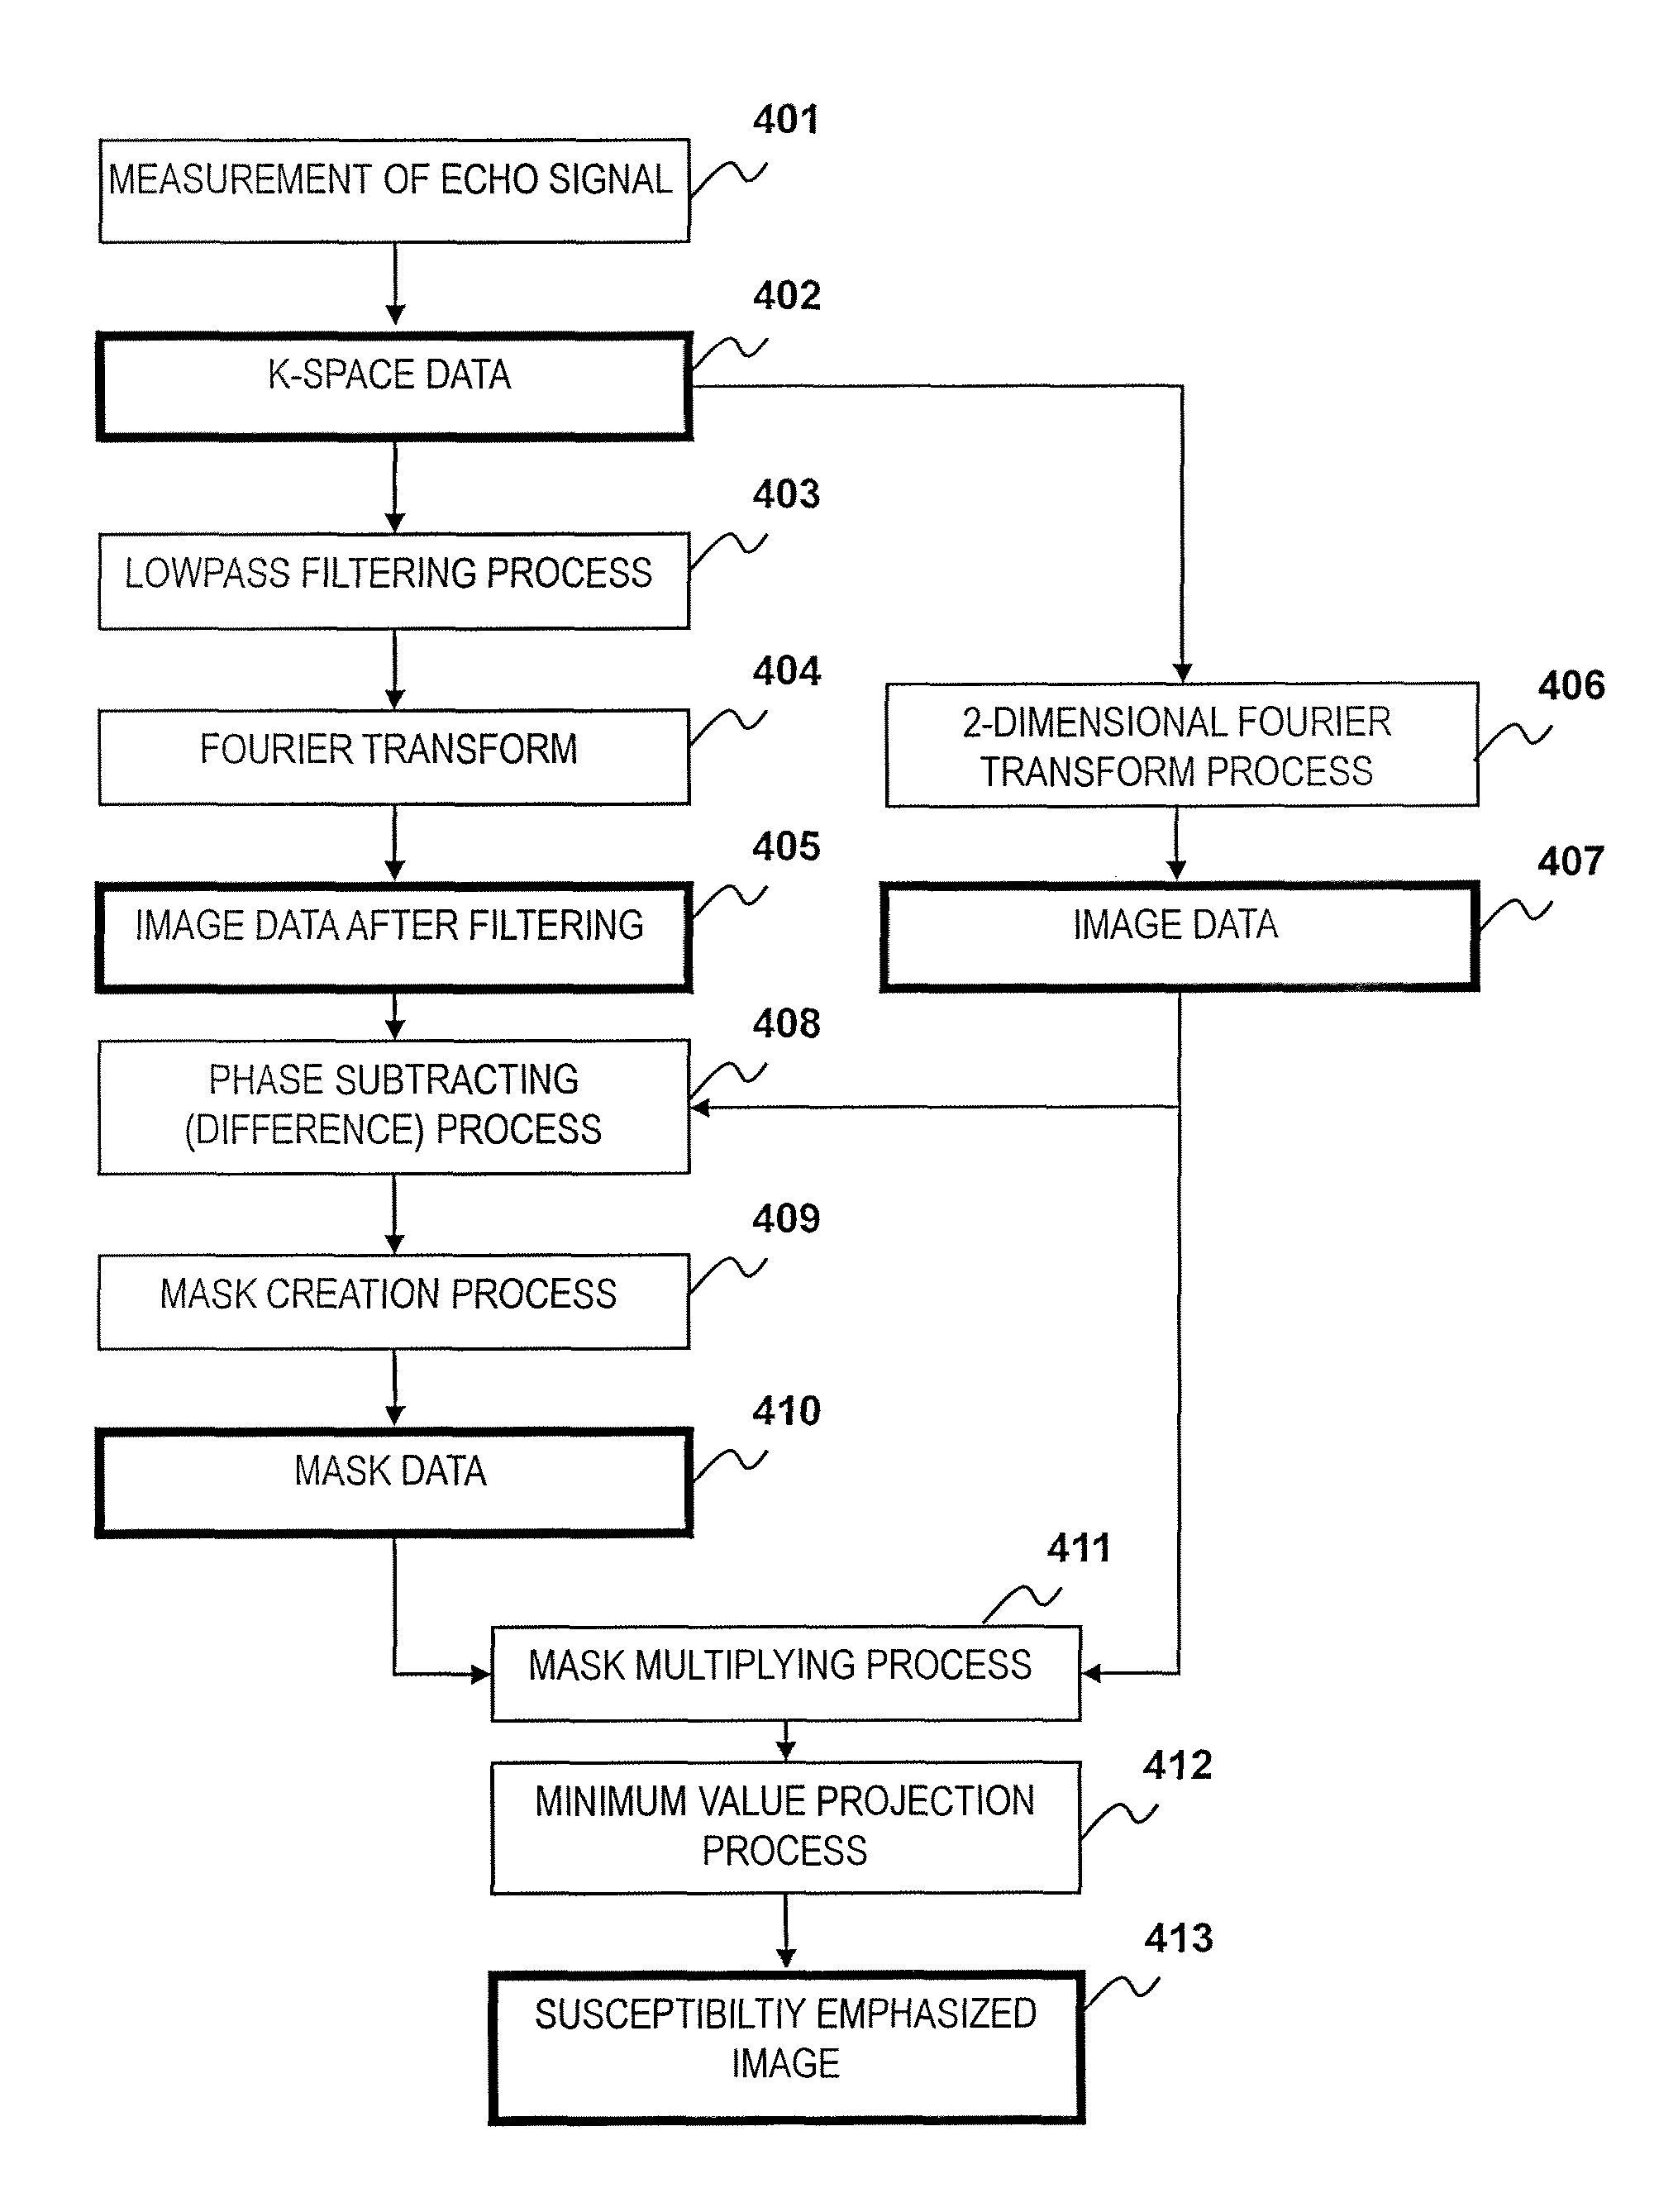 Magnetic resonance imaging apparatus and method configured for susceptibility-emphasized imaging with improved signal-to-noise ratio